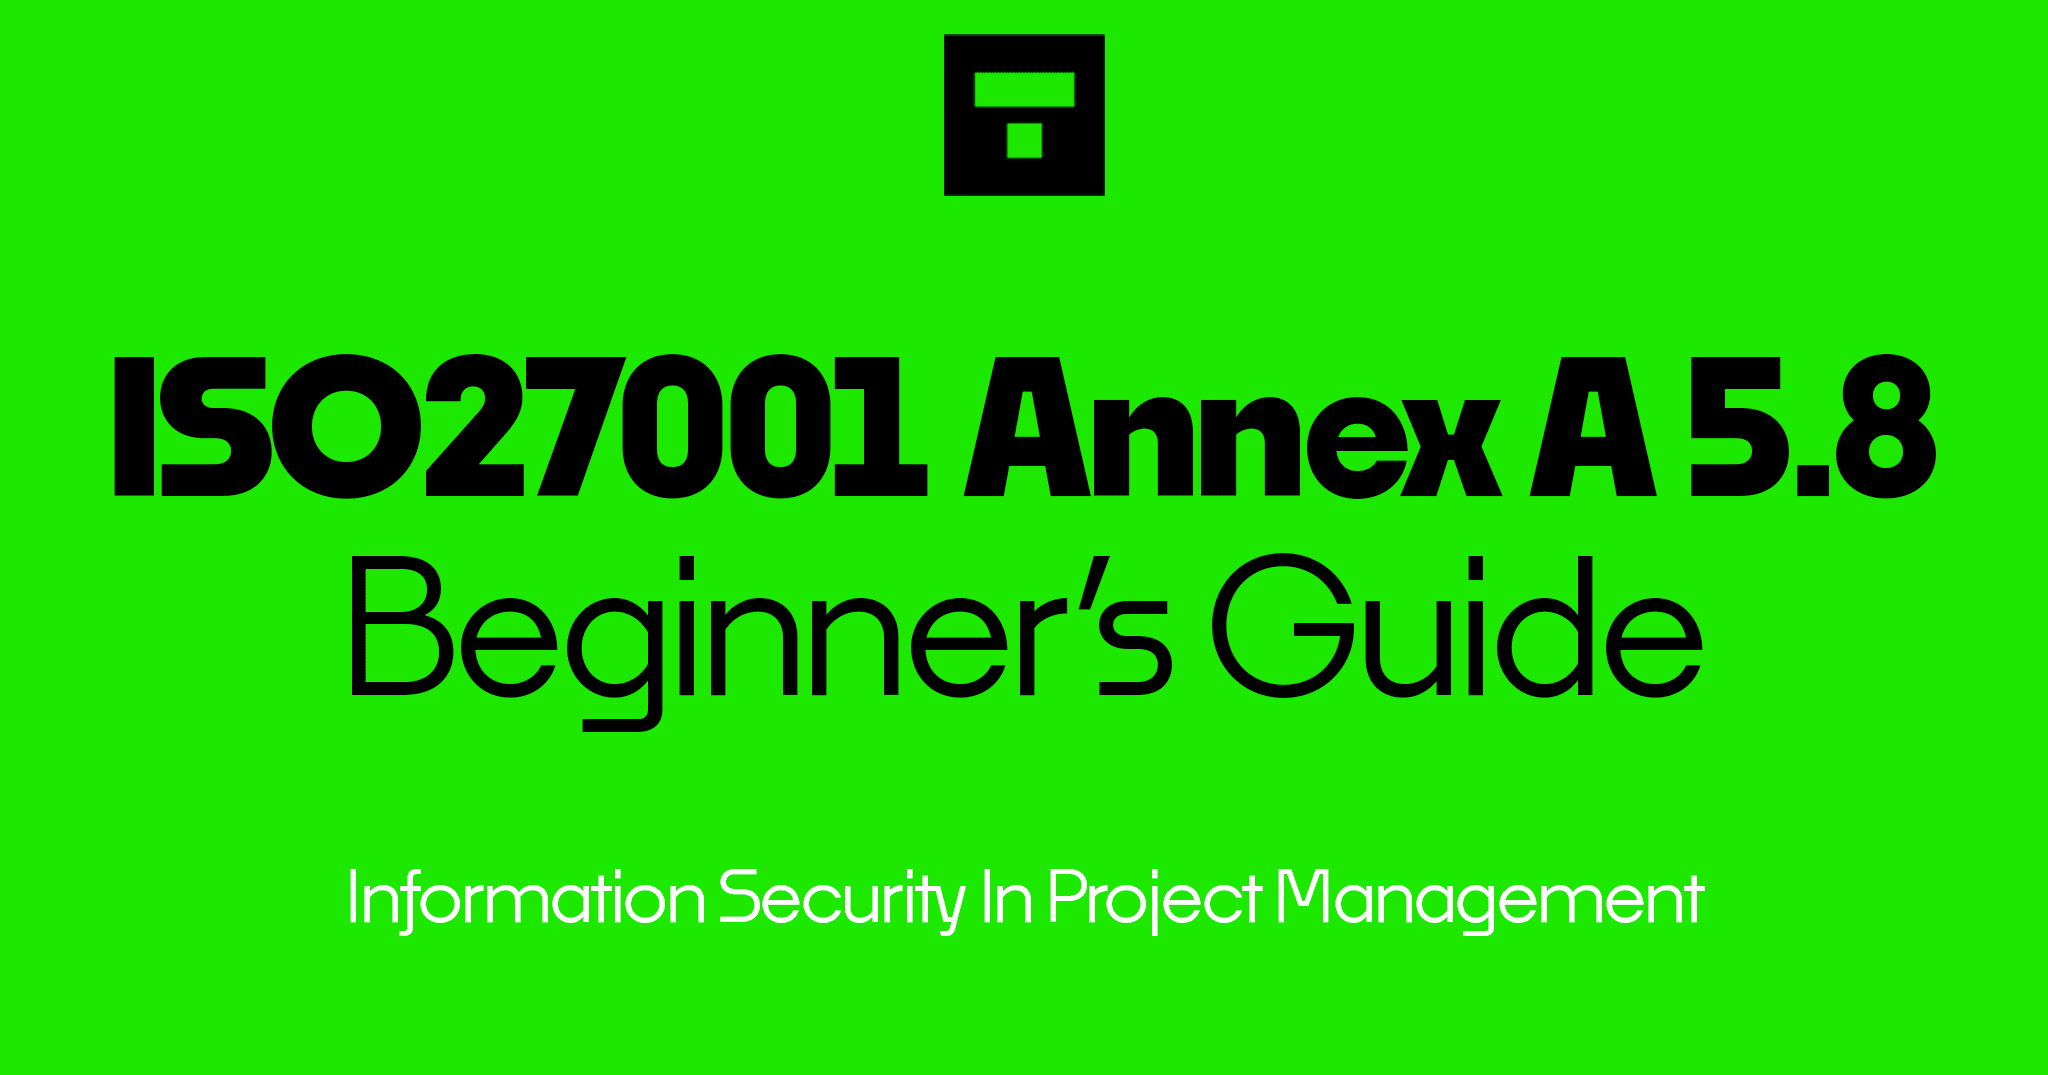 How To Implement ISO 27001 Annex A 5.8 Information Security In Project Management